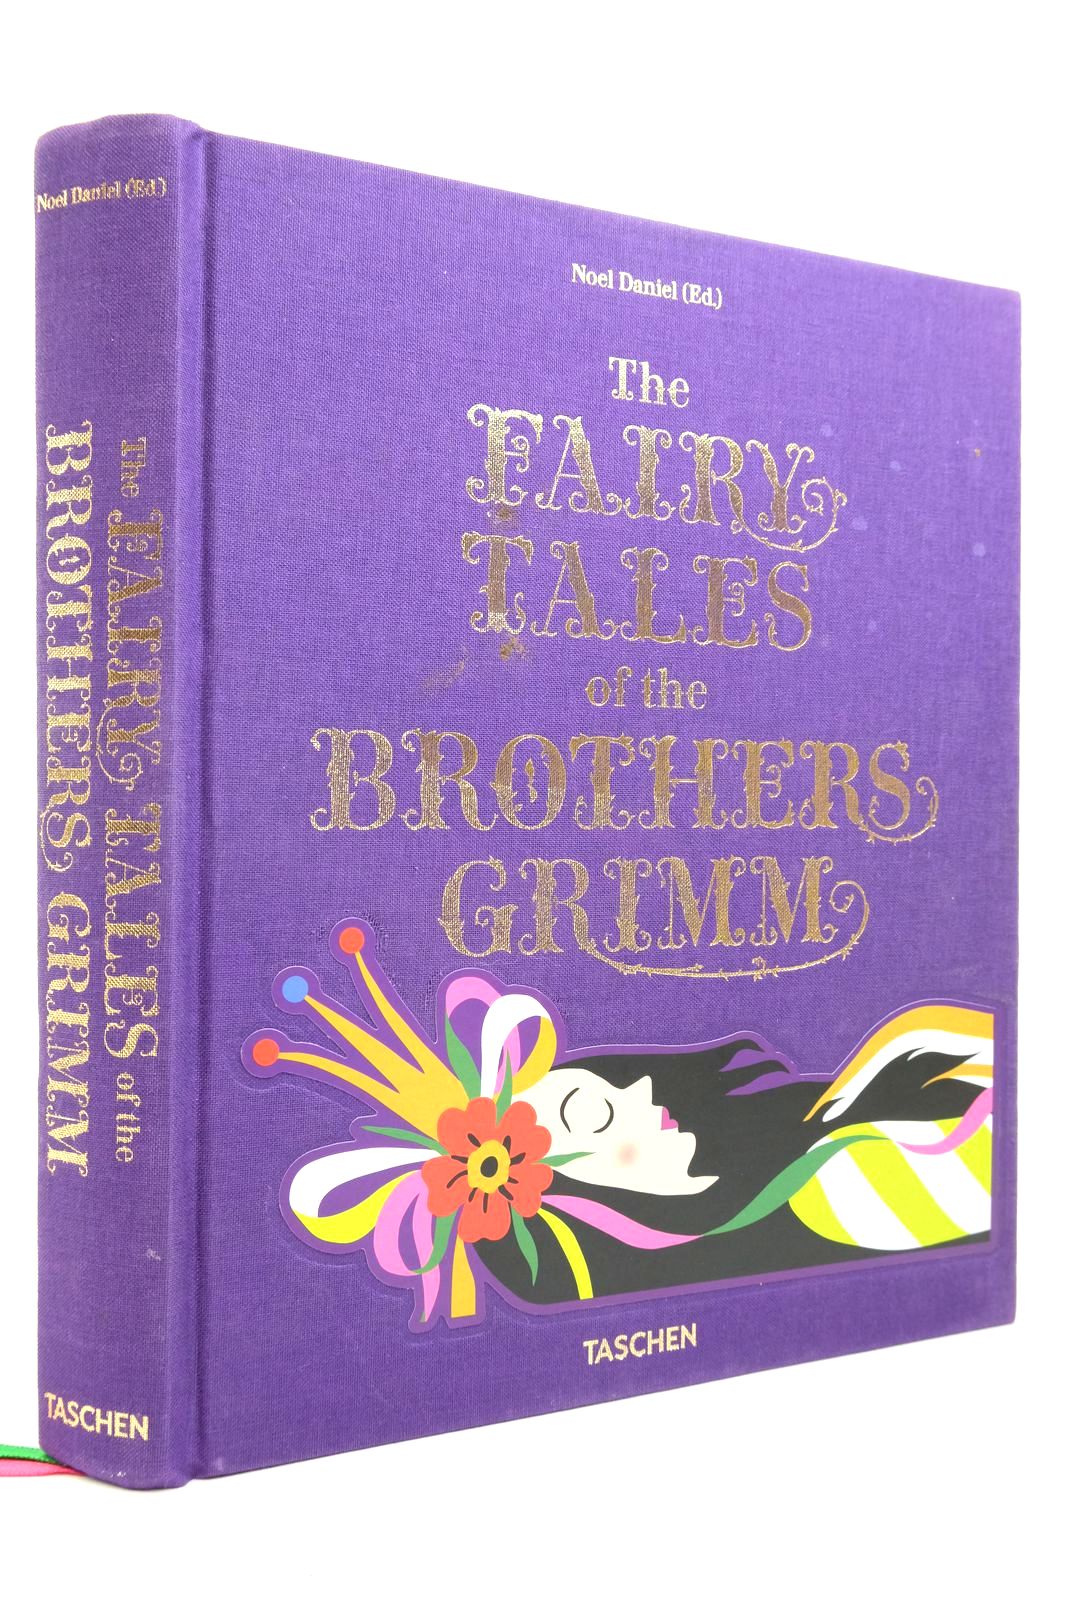 Photo of THE FAIRY TALES OF THE BROTHERS GRIMM written by Grimm, Brothers
Daniel, Noel illustrated by Crane, Walter
Nielsen, Kay
Smith, Jessie Willcox
Cruikshank, George
et al.,  published by Taschen (STOCK CODE: 2140749)  for sale by Stella & Rose's Books